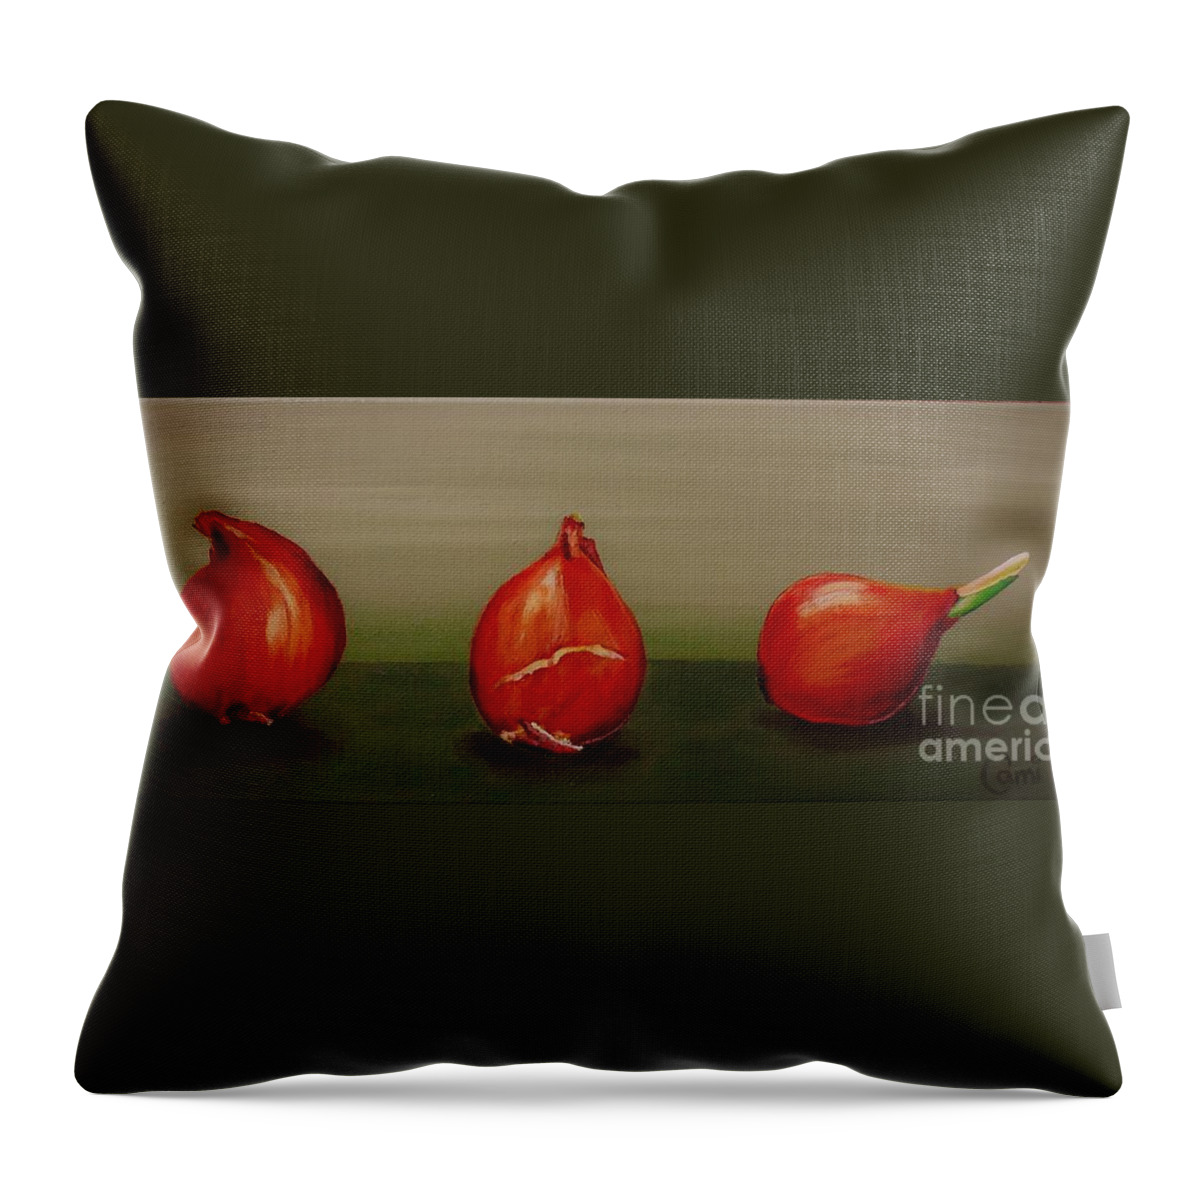 Tulip Bulbs Throw Pillow featuring the painting Three Tulip Bulbs by Cami Lee